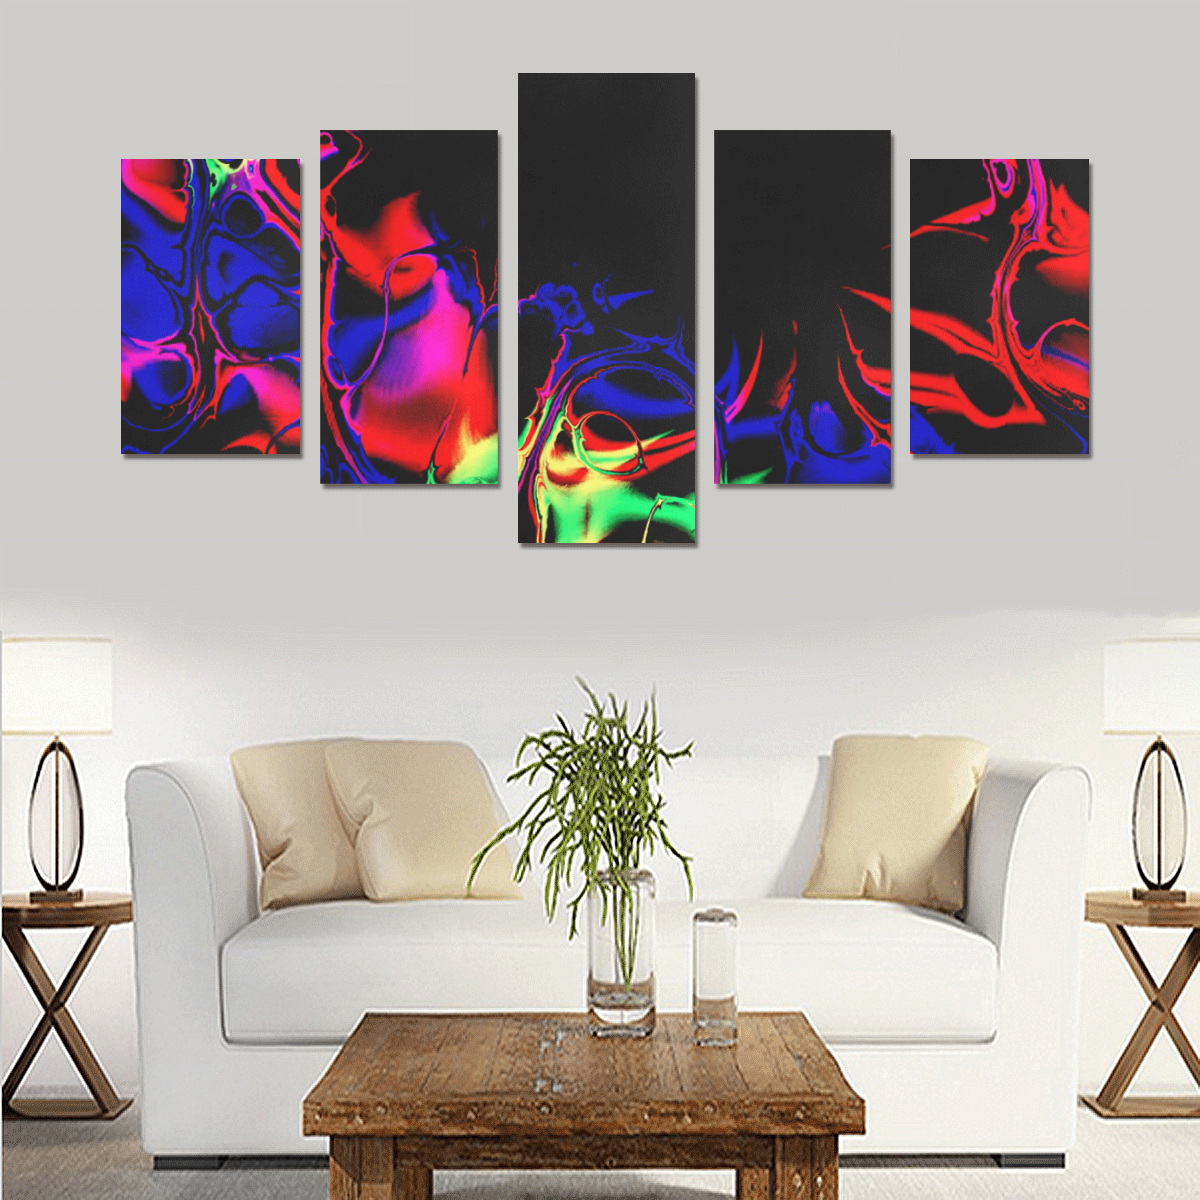 Abstract glowing 02 Canvas Print Sets C (No Frame)